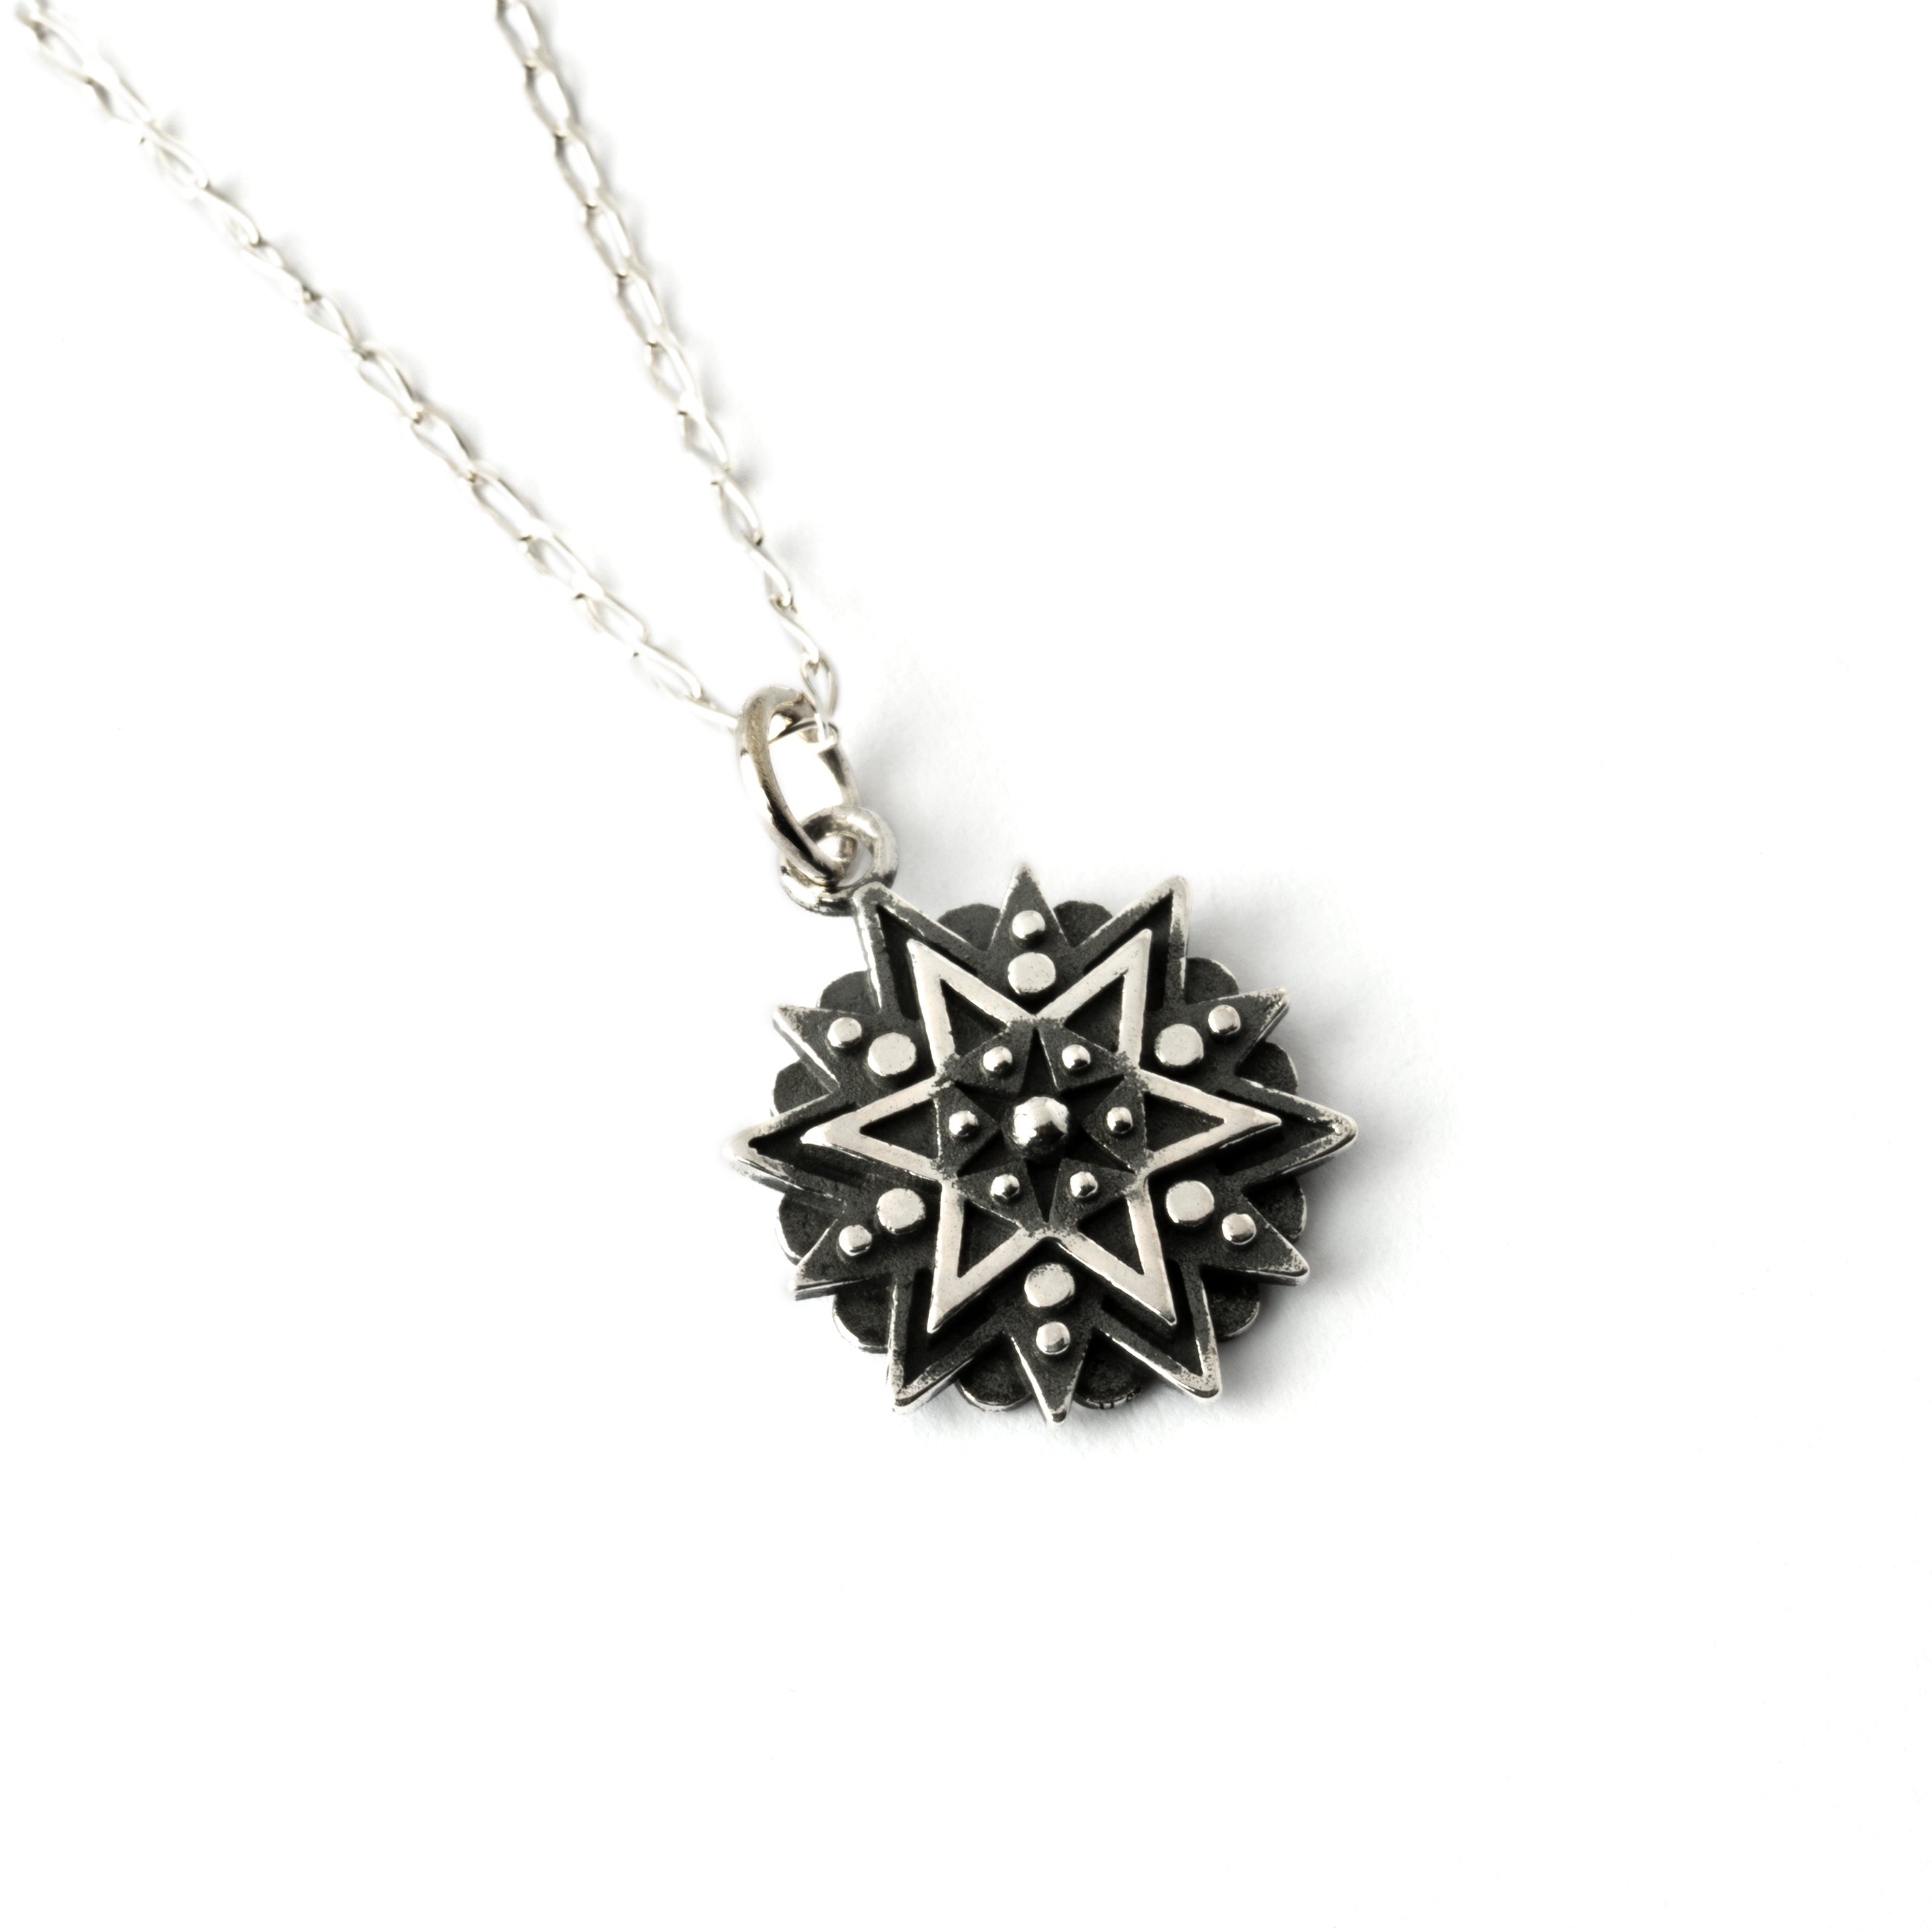 Inspiration Star Charm necklace right side view